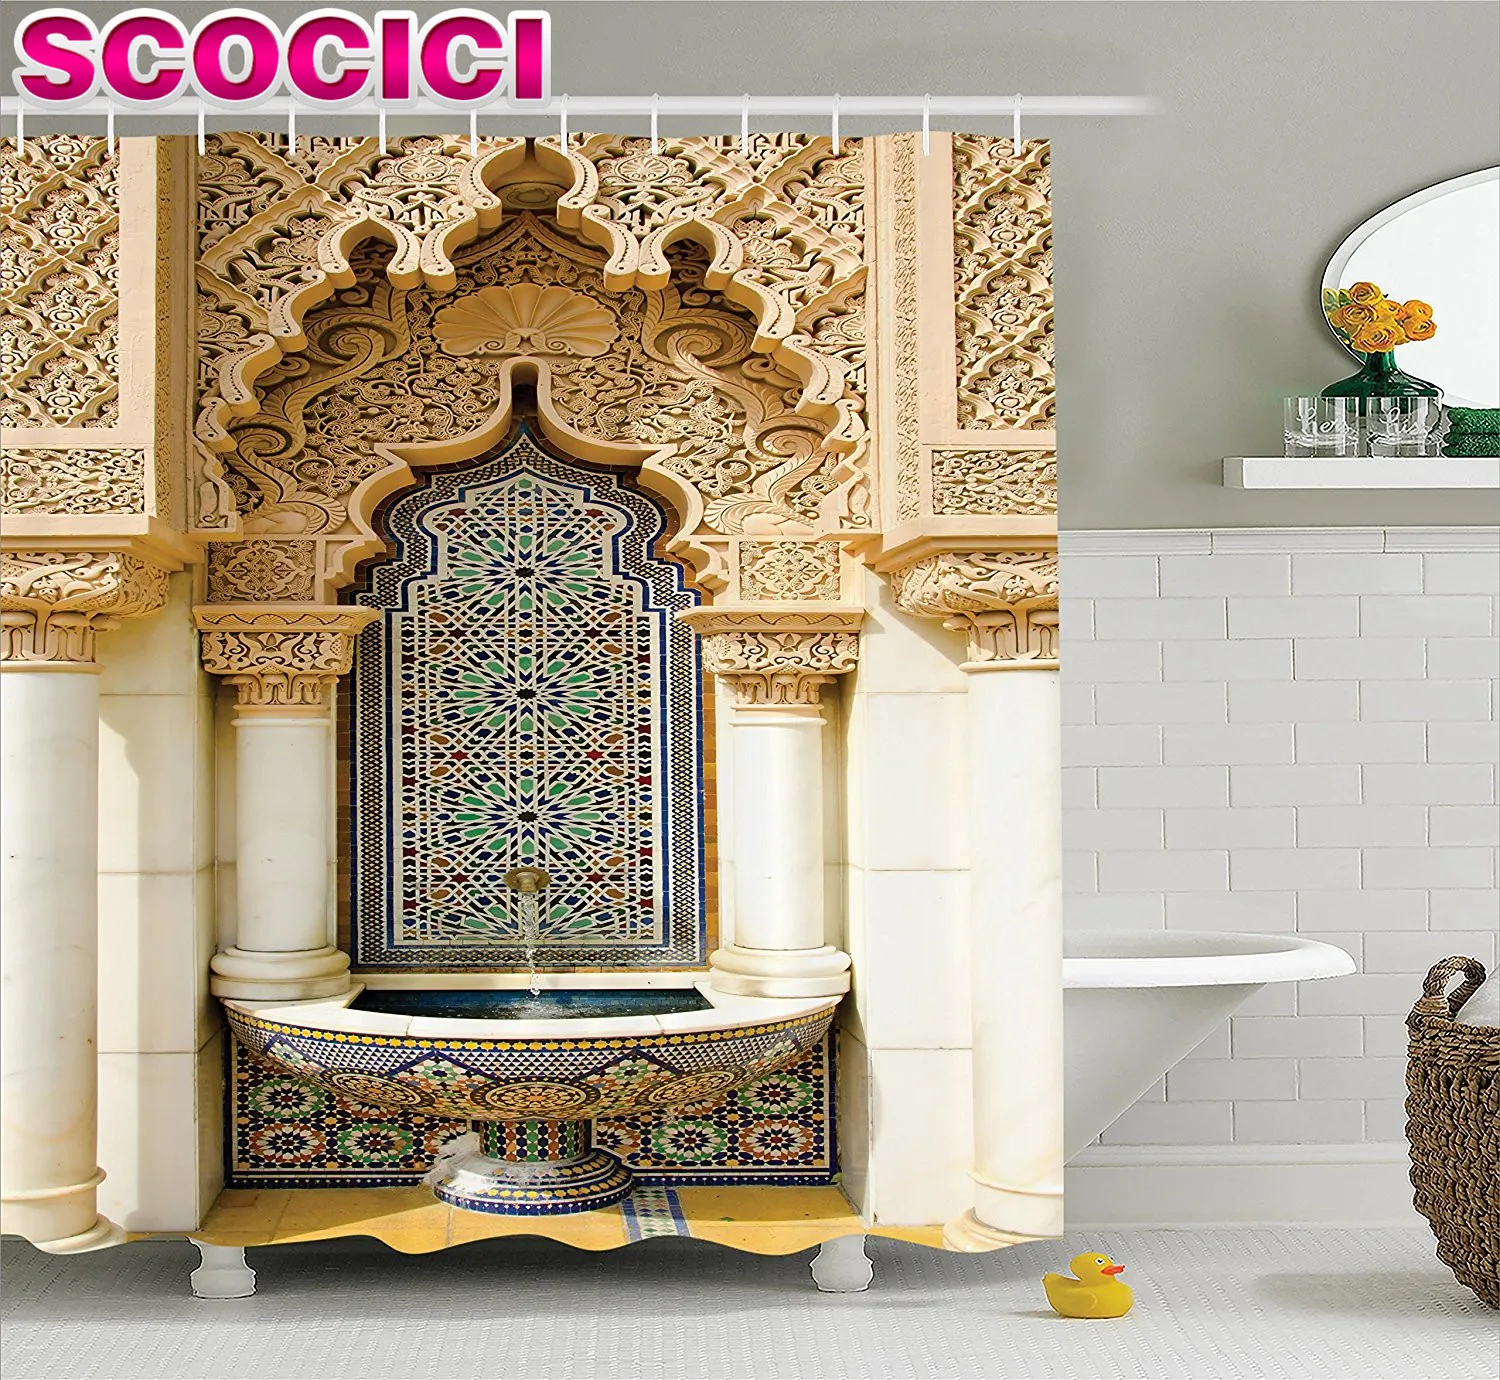 Moroccan Decor Shower Curtain Vintage Building Design Islamic Housing Art Historic Exterior Facade Mosaic Picture Polyester Fabr